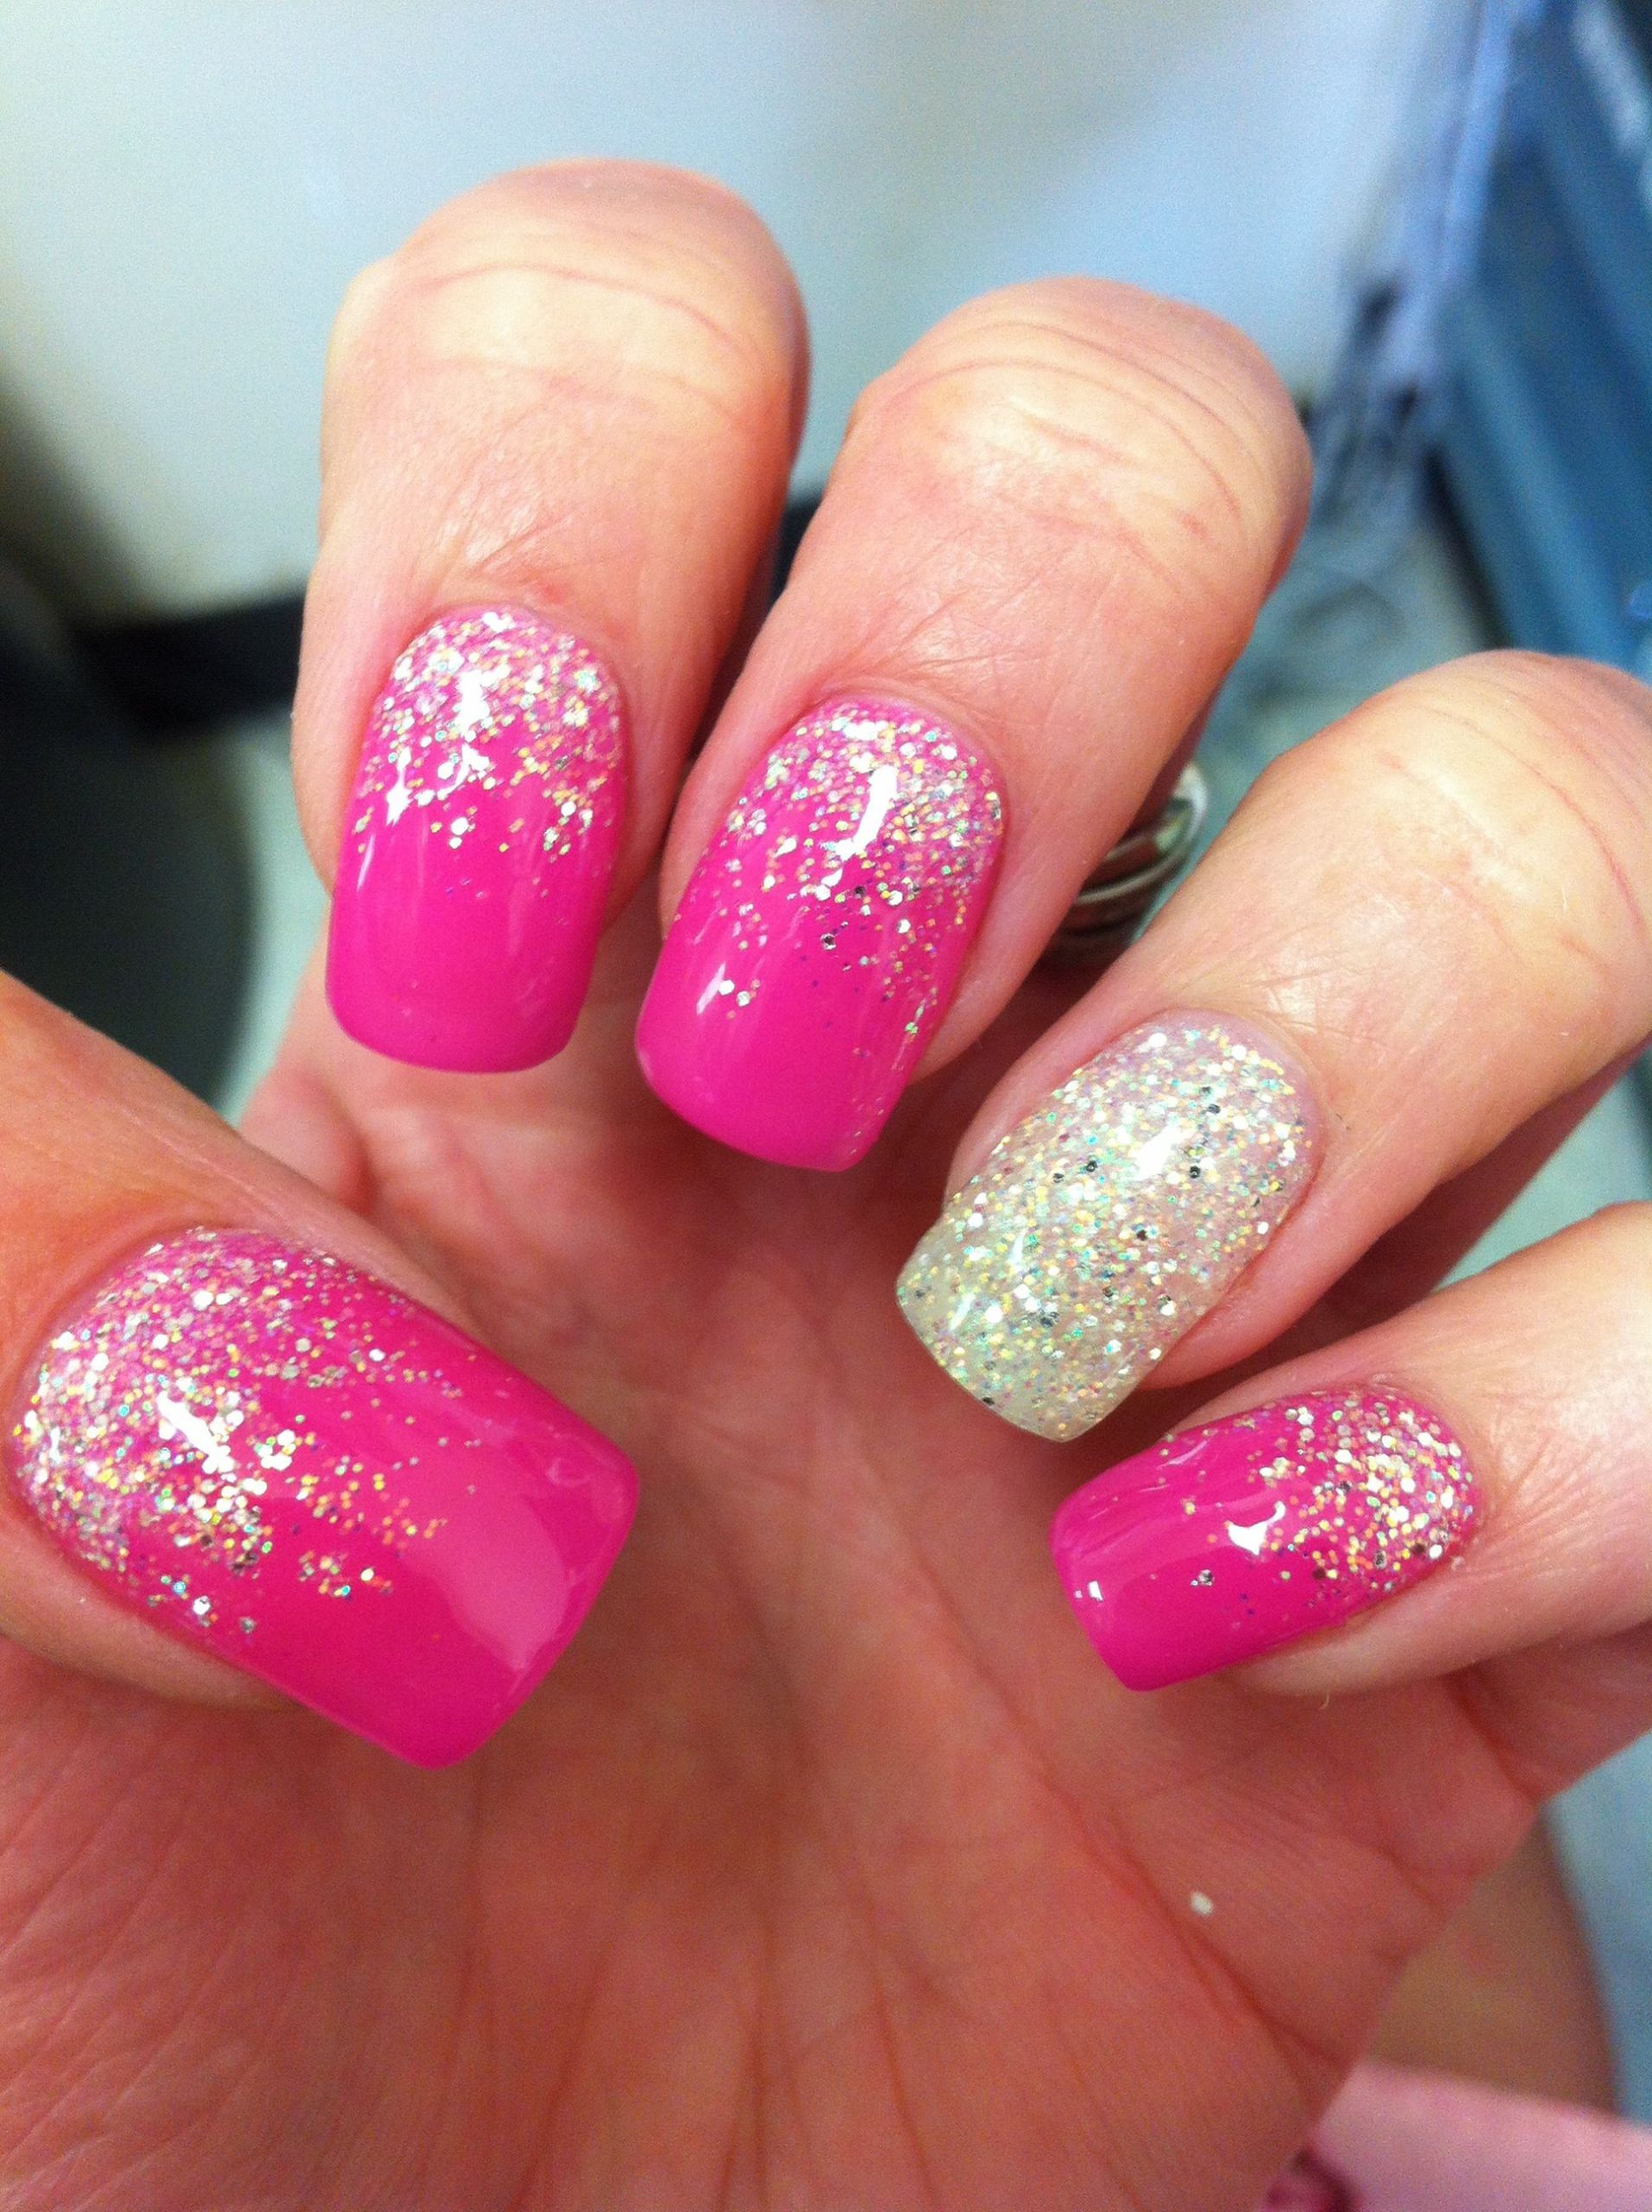 Glitter Gel Nail Designs
 Gel nail art Glitter fade done with INT s drama and